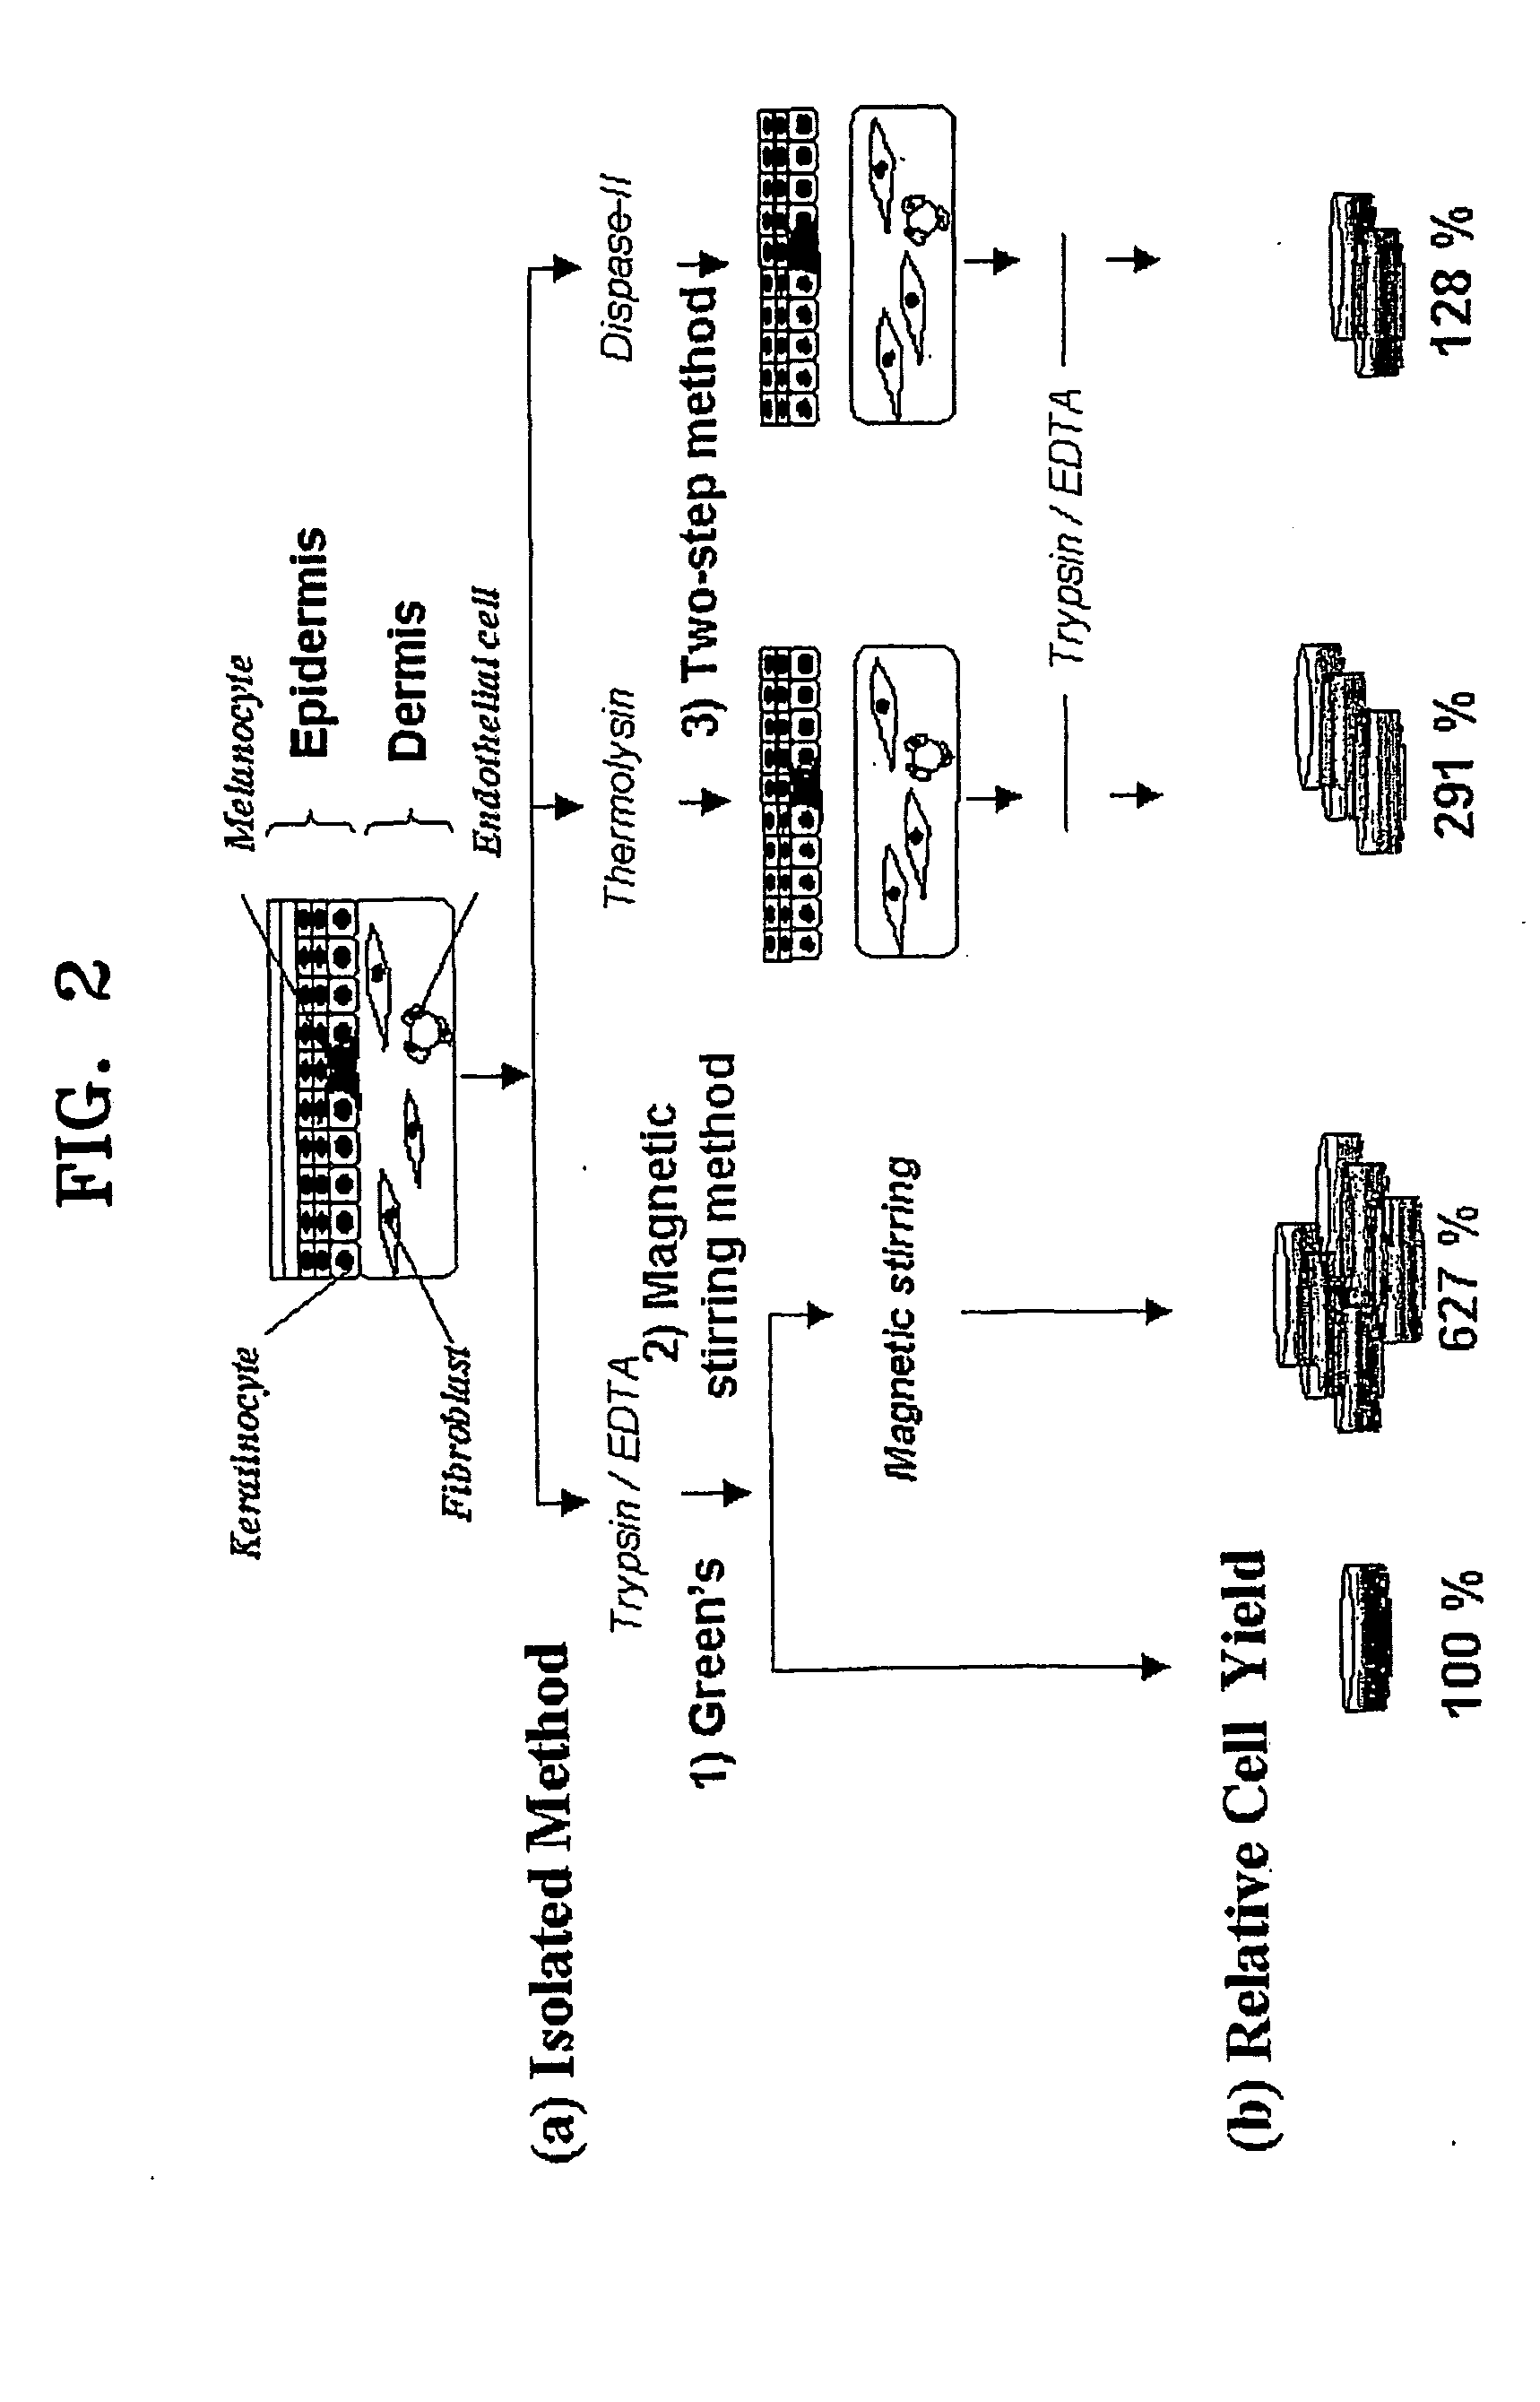 Method of isolating epithelial cells, method of preconditioning cells, and methods of preparing bioartificial skin and dermis with the epithelial cells and preconditioned cells